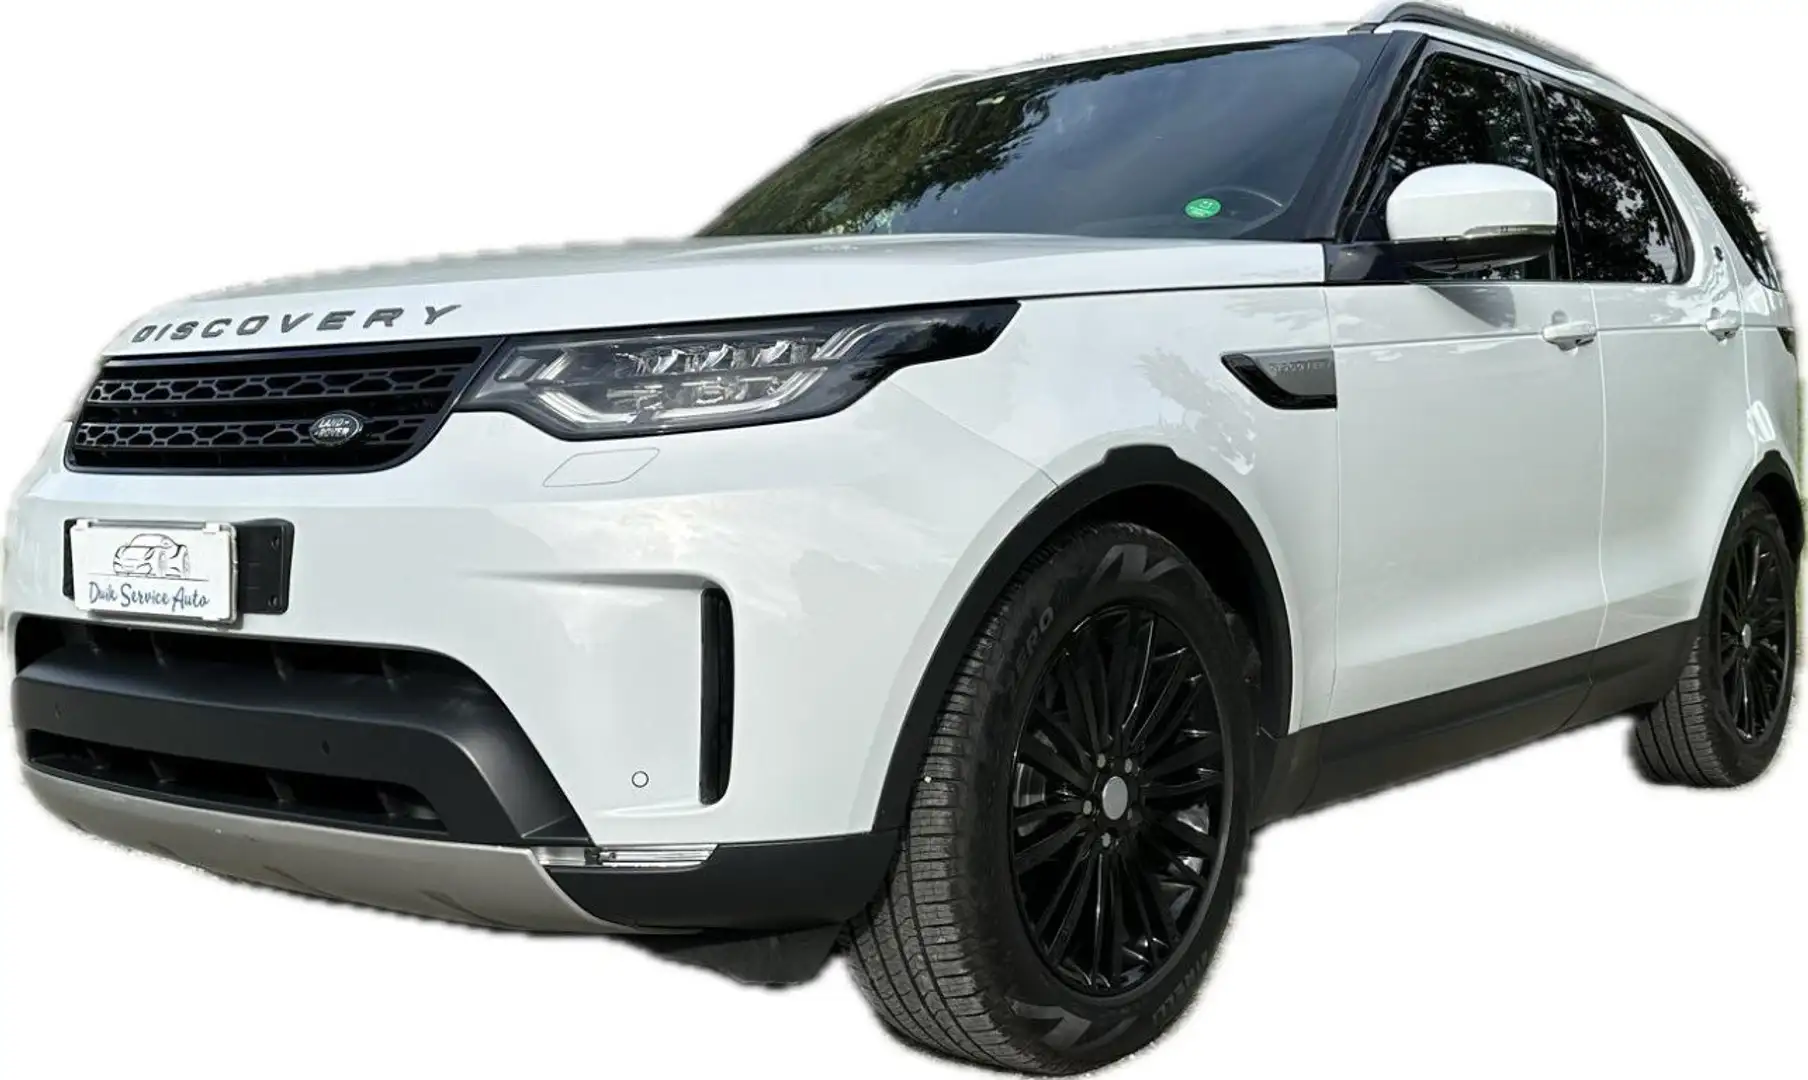 Land Rover Discovery V 2.0sd4 HSE LUXURY 7p Auto Motore Nuovo UFFICIALE Weiß - 1